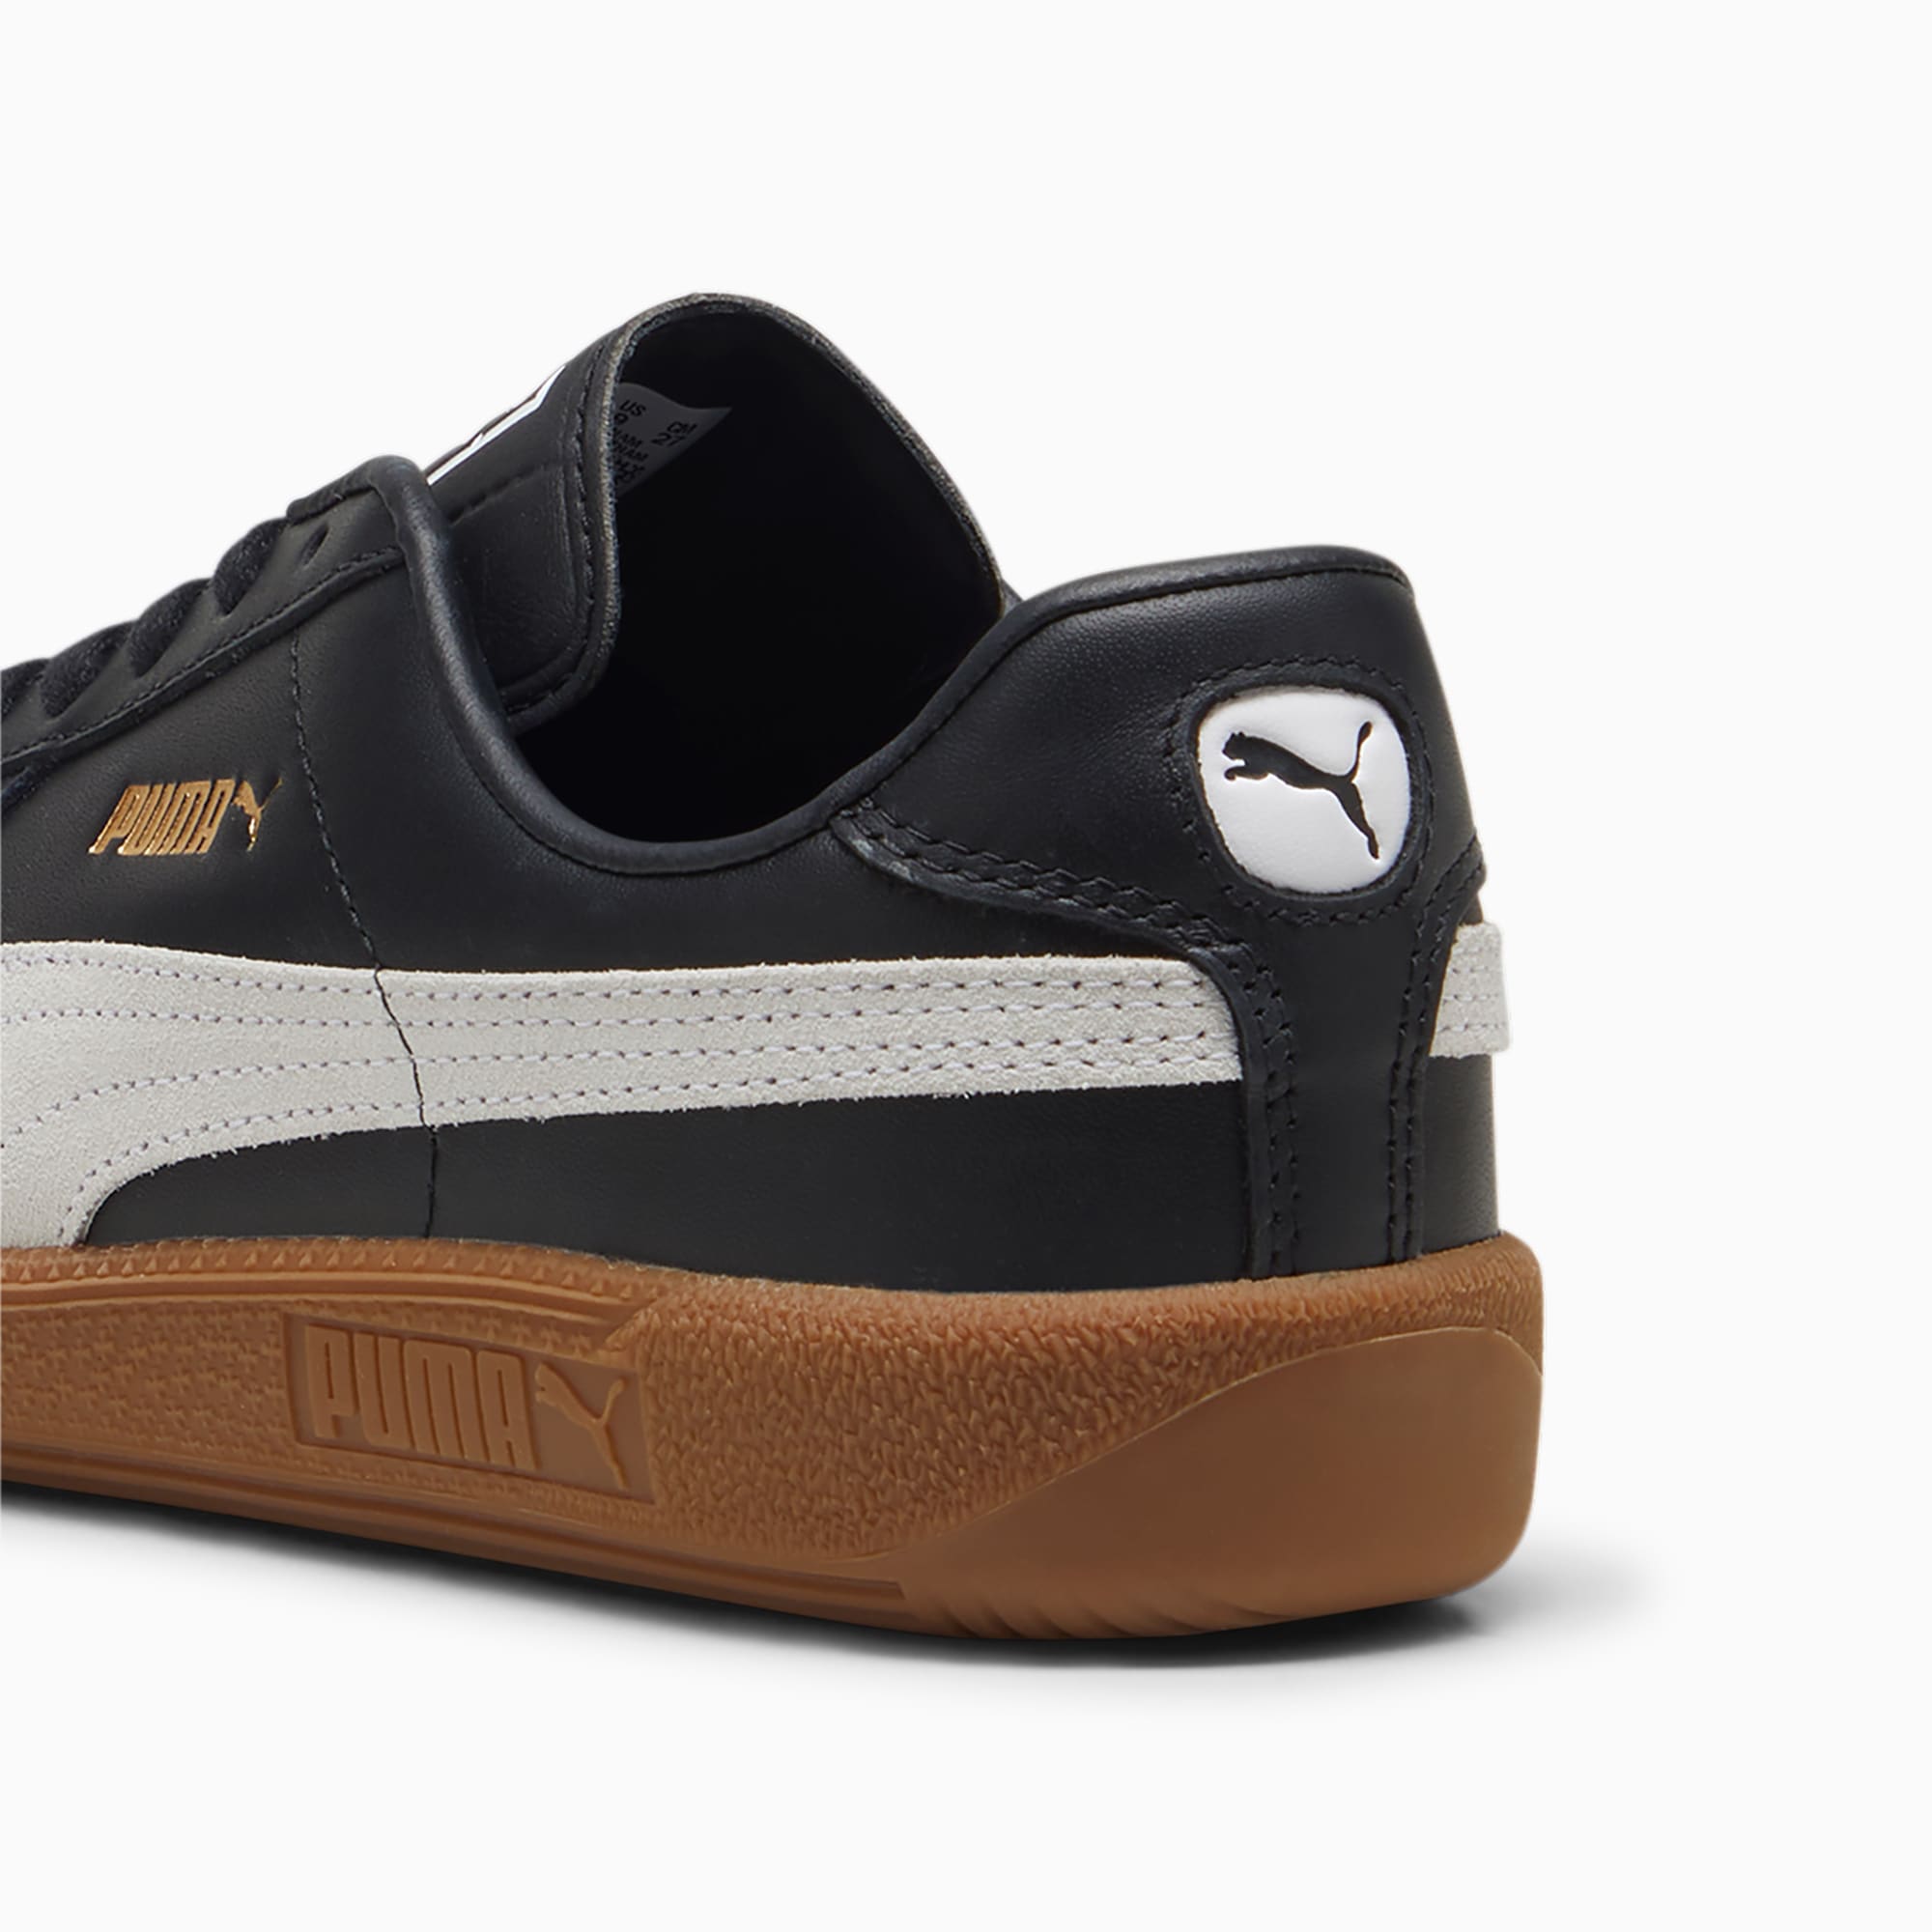 Women's PUMA Army Trainer Sneakers, Black/White/Gum, Size 35,5, Shoes